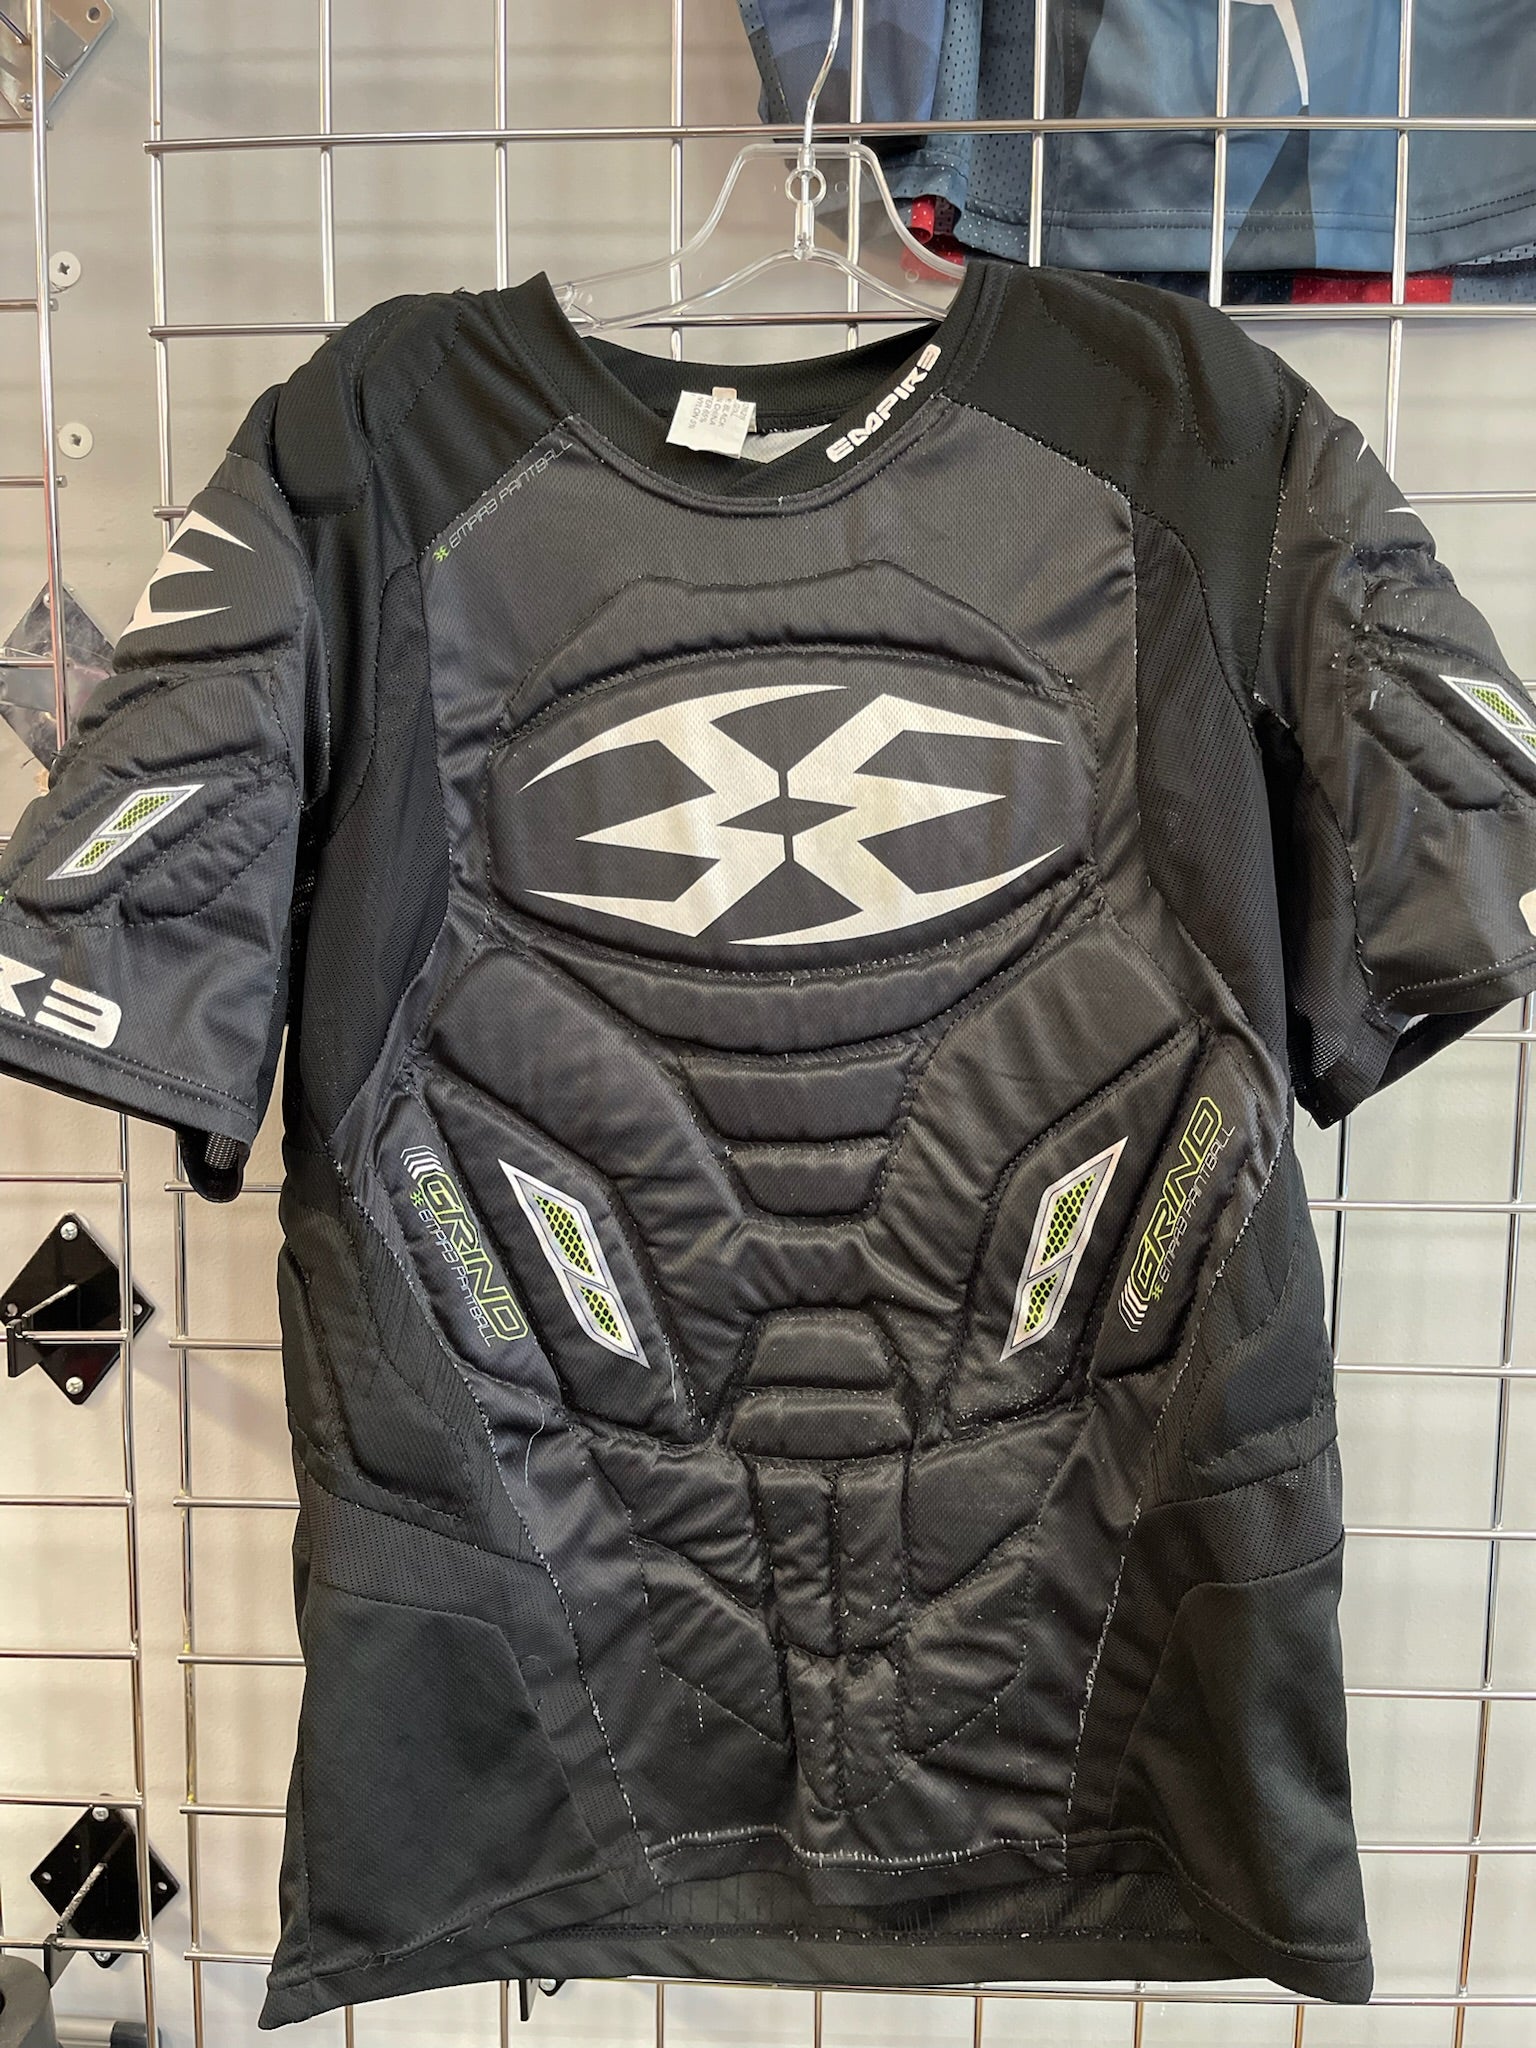 Used Empire Grind Chest Protector - L/XL